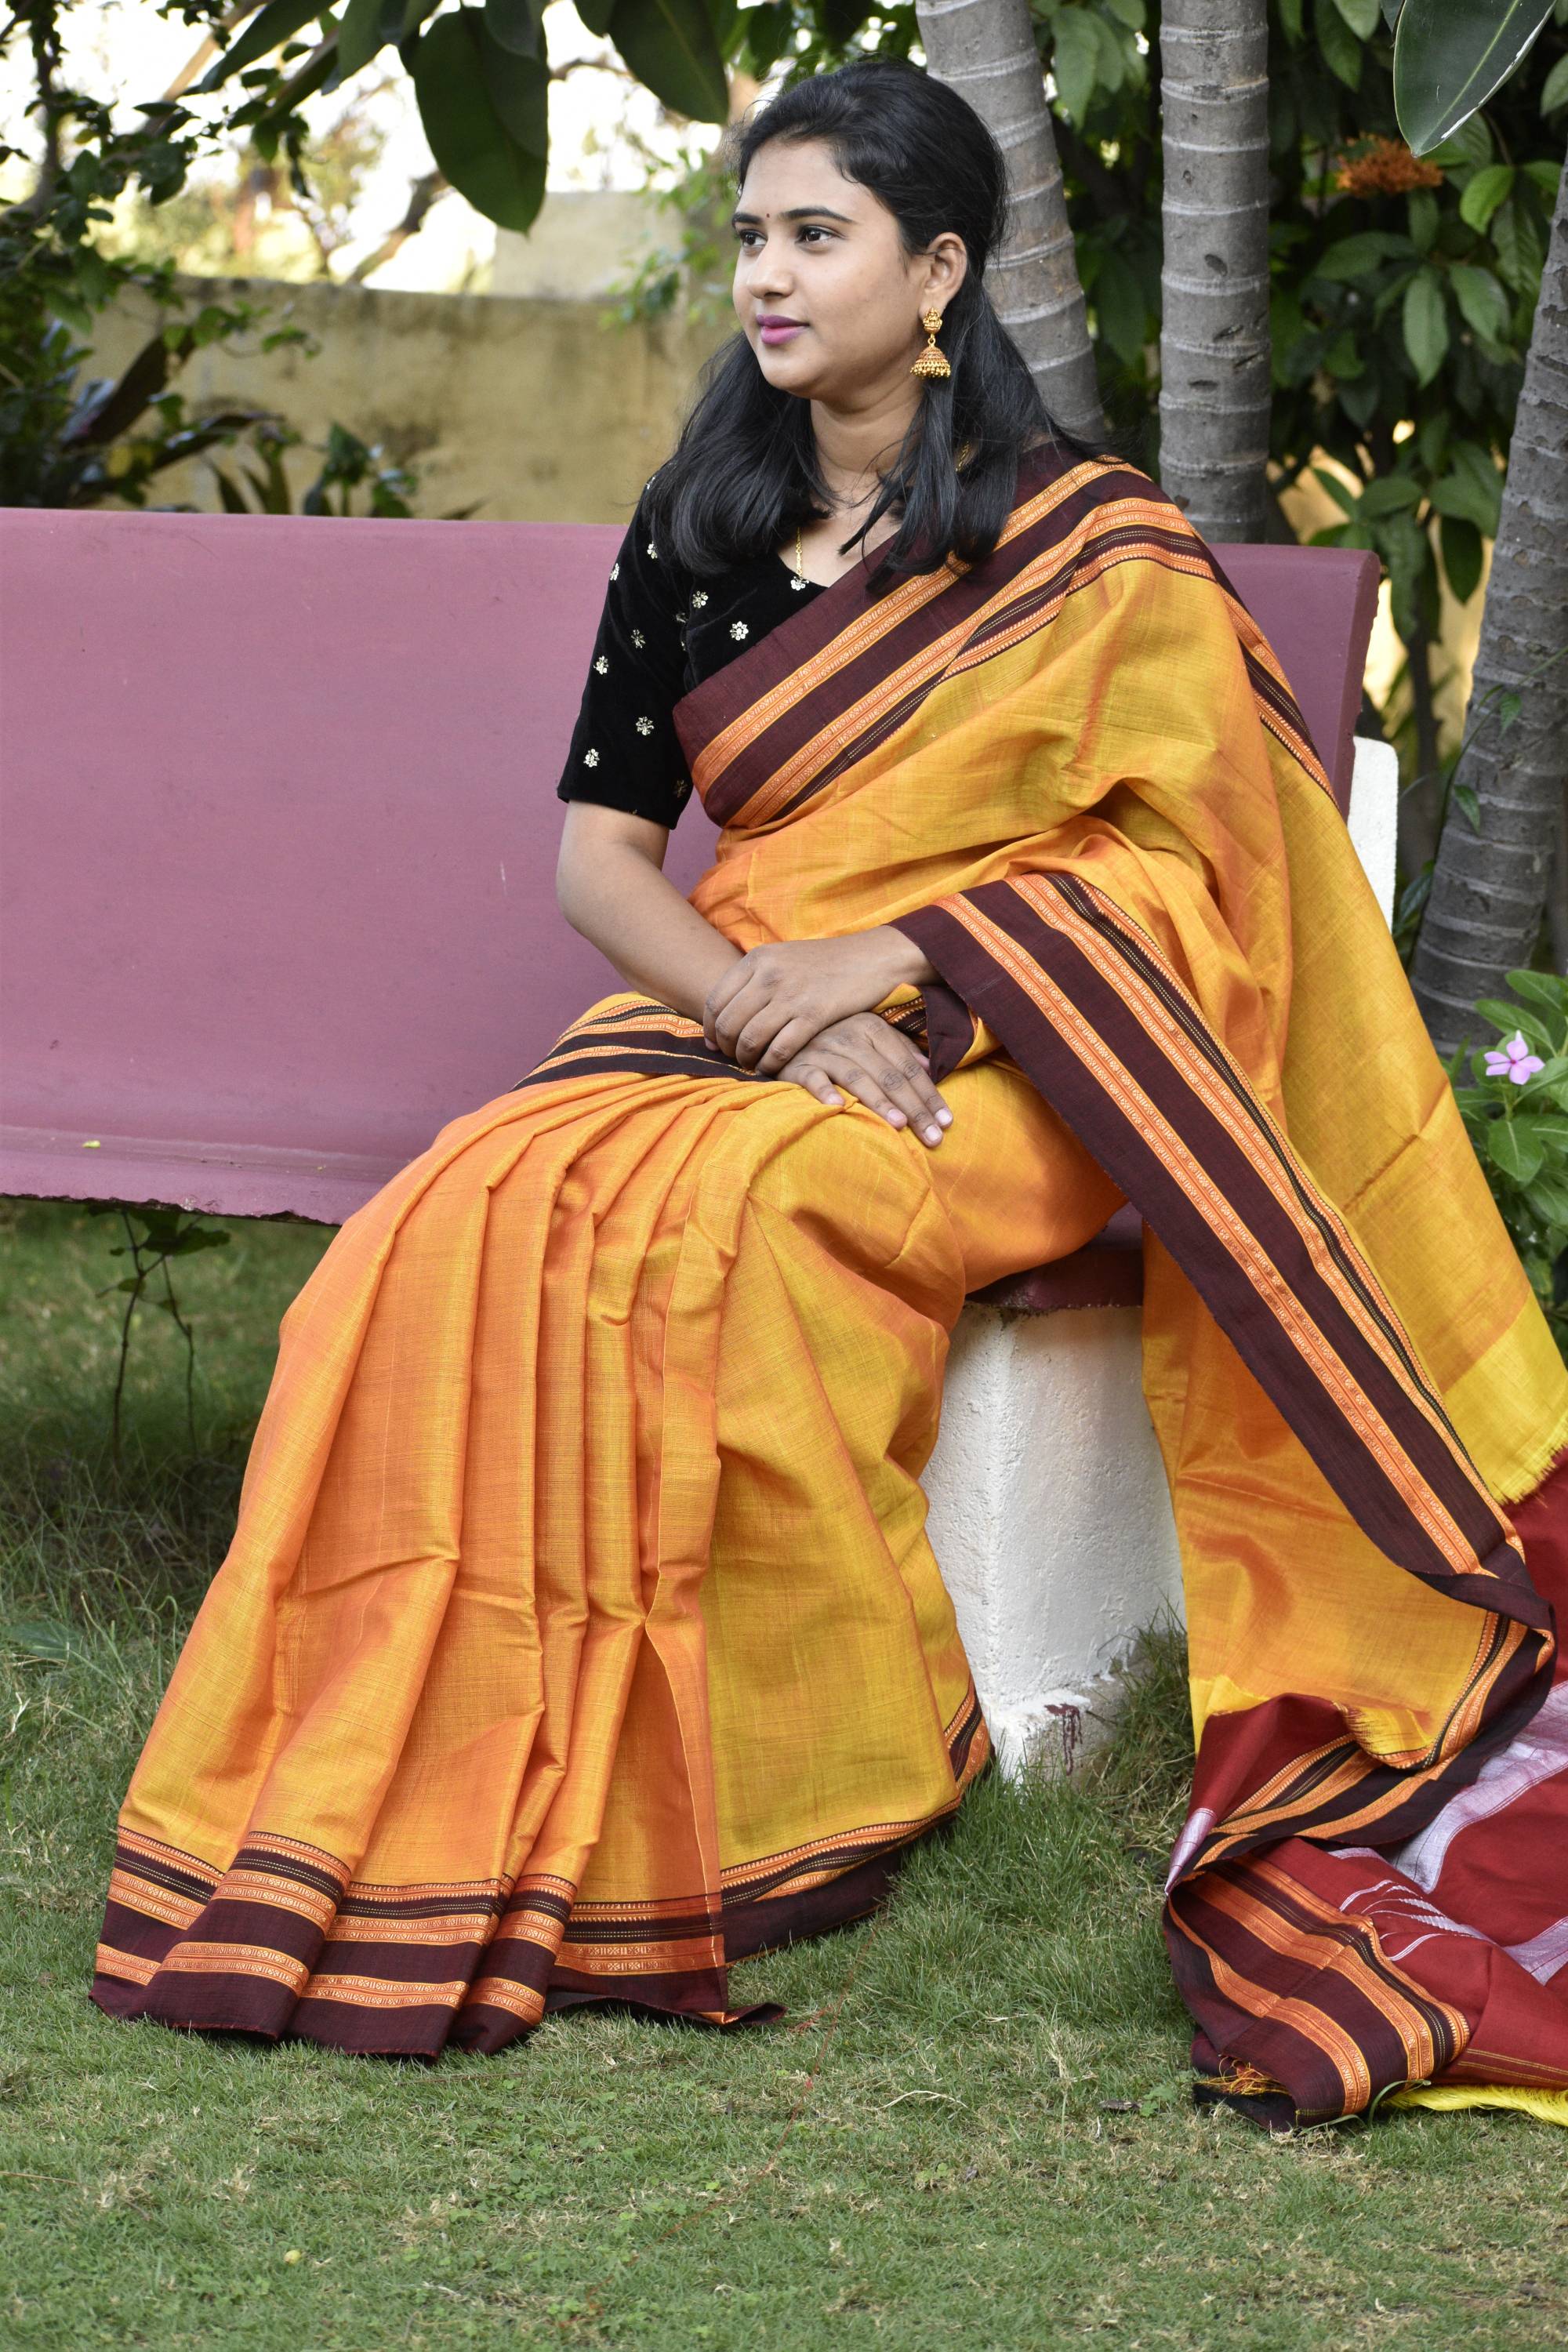 Purple Chiffon Silk Saree highlighted with Striped Body and contrast edging  - Mirra Clothing